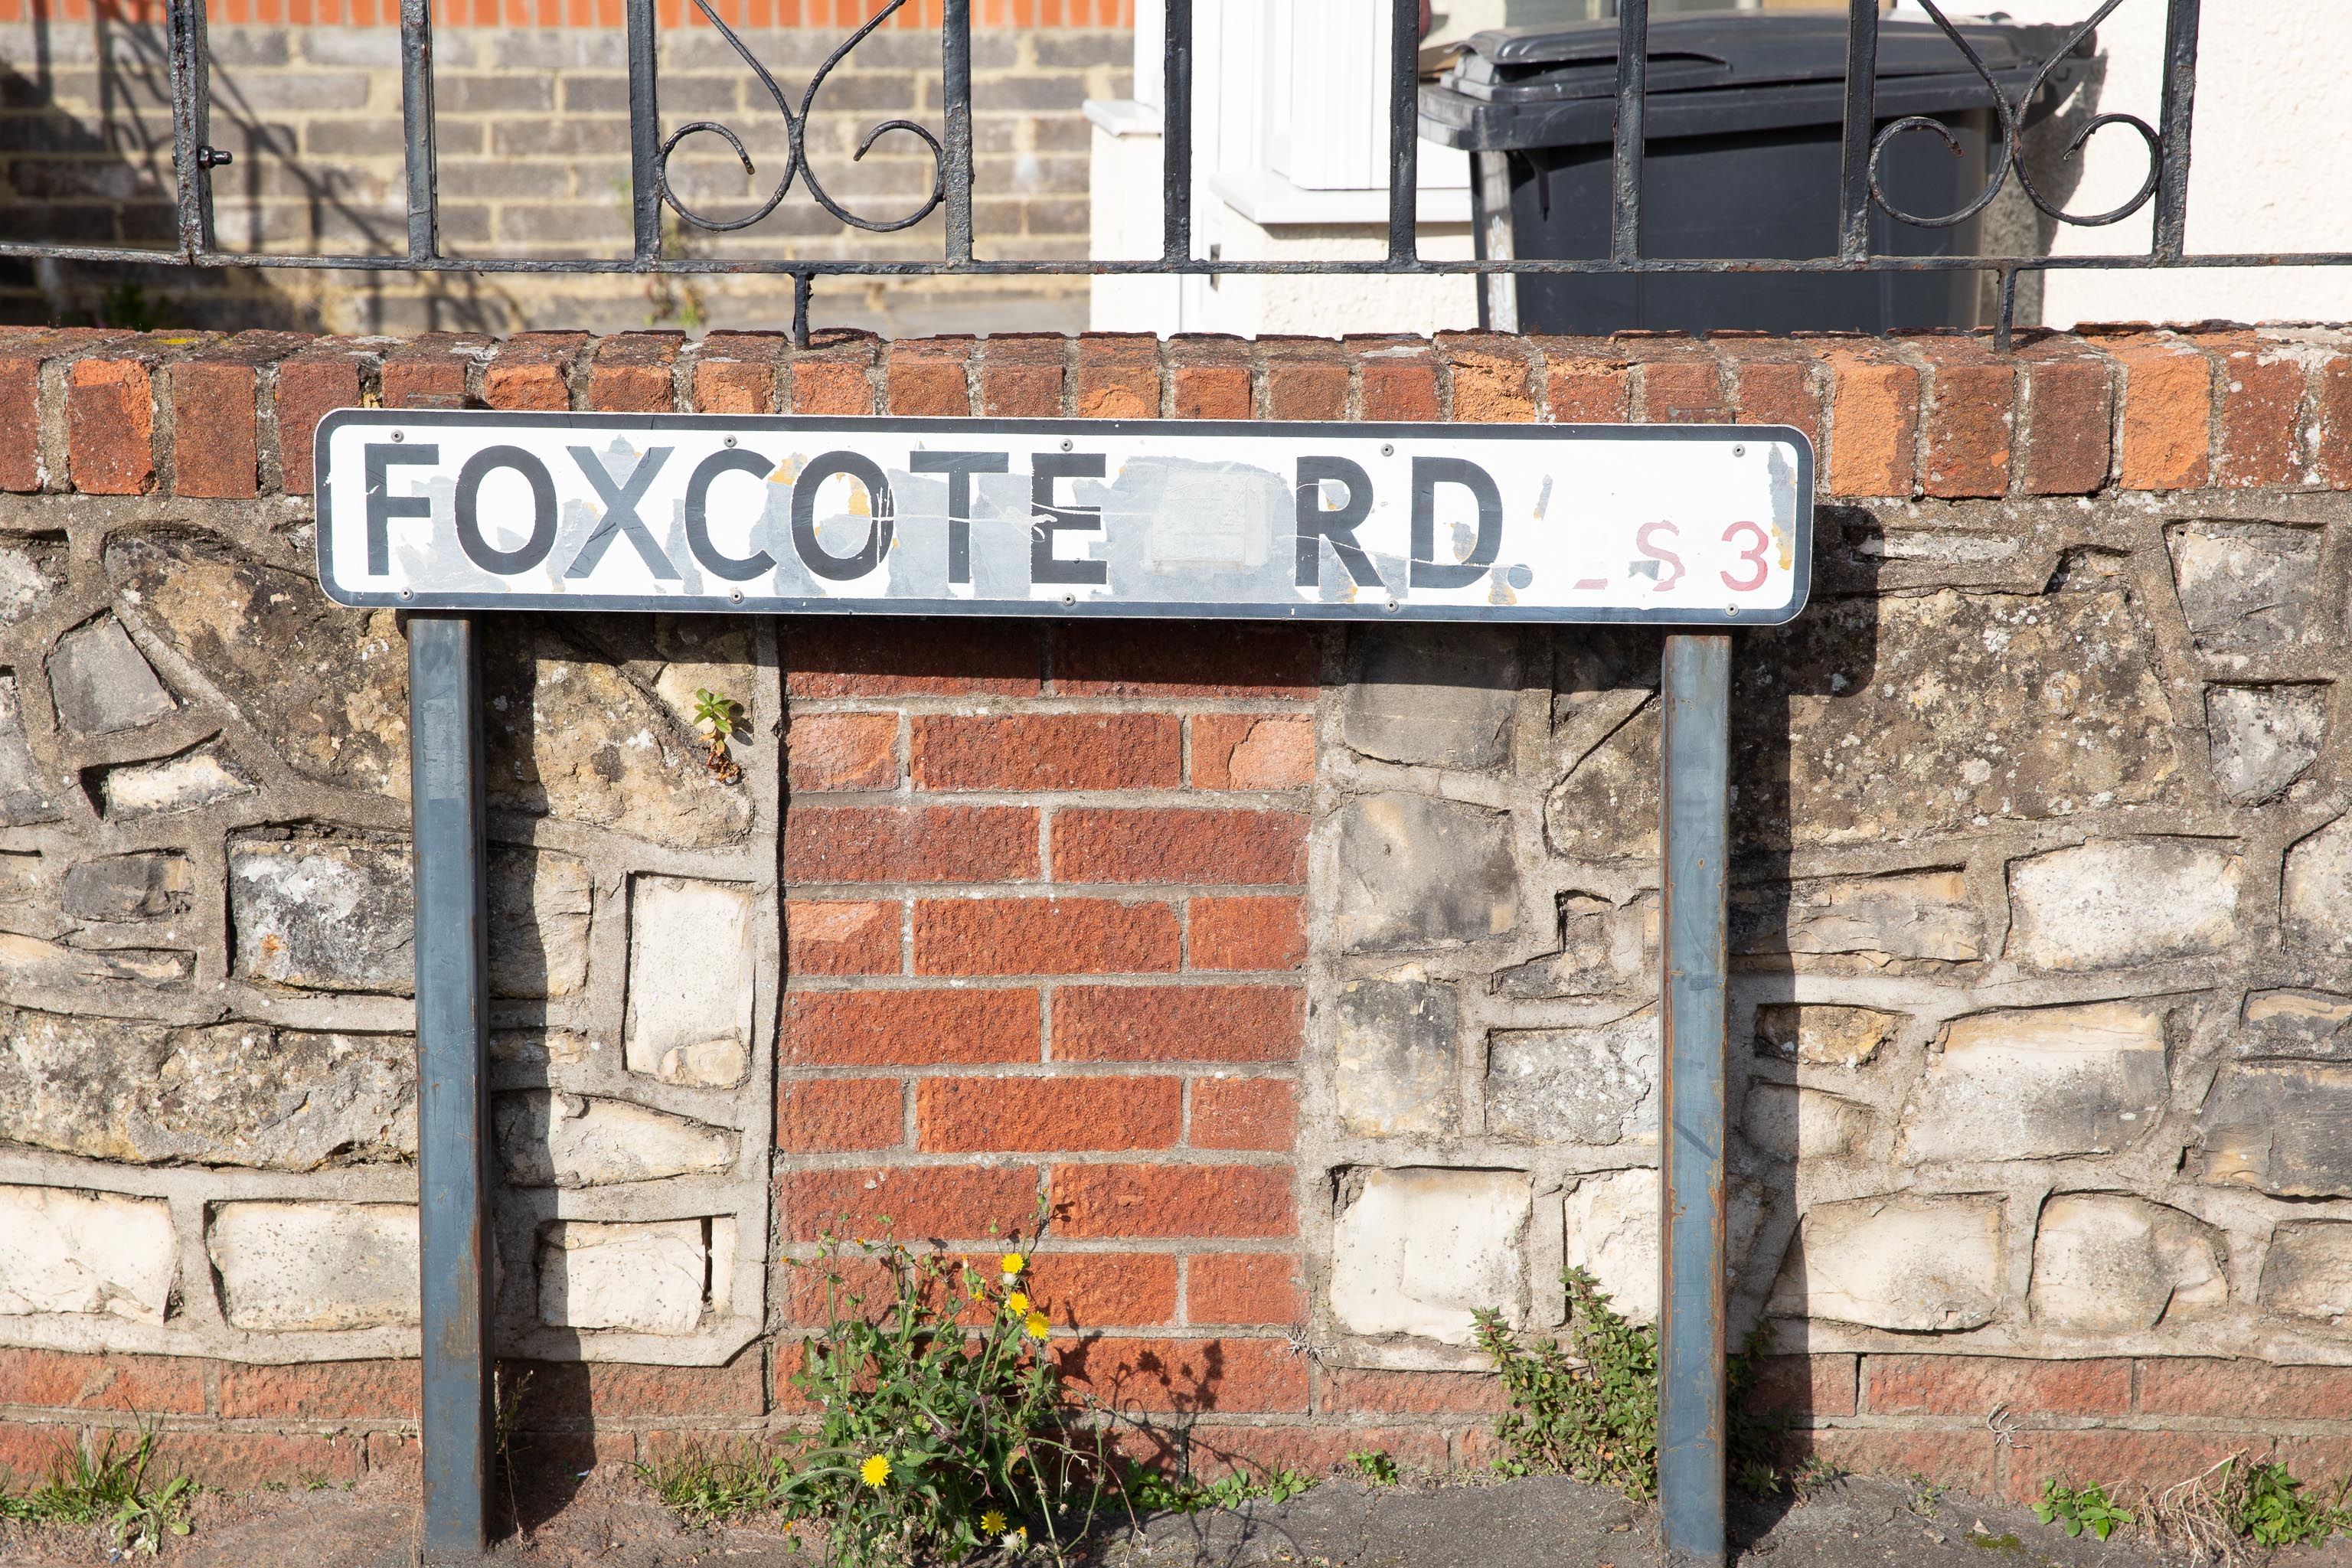 Foxcote Road
I presume a foxcote is like a dovecote, only for foxes. Nice to imagine them all there in their array of little foxholes.
